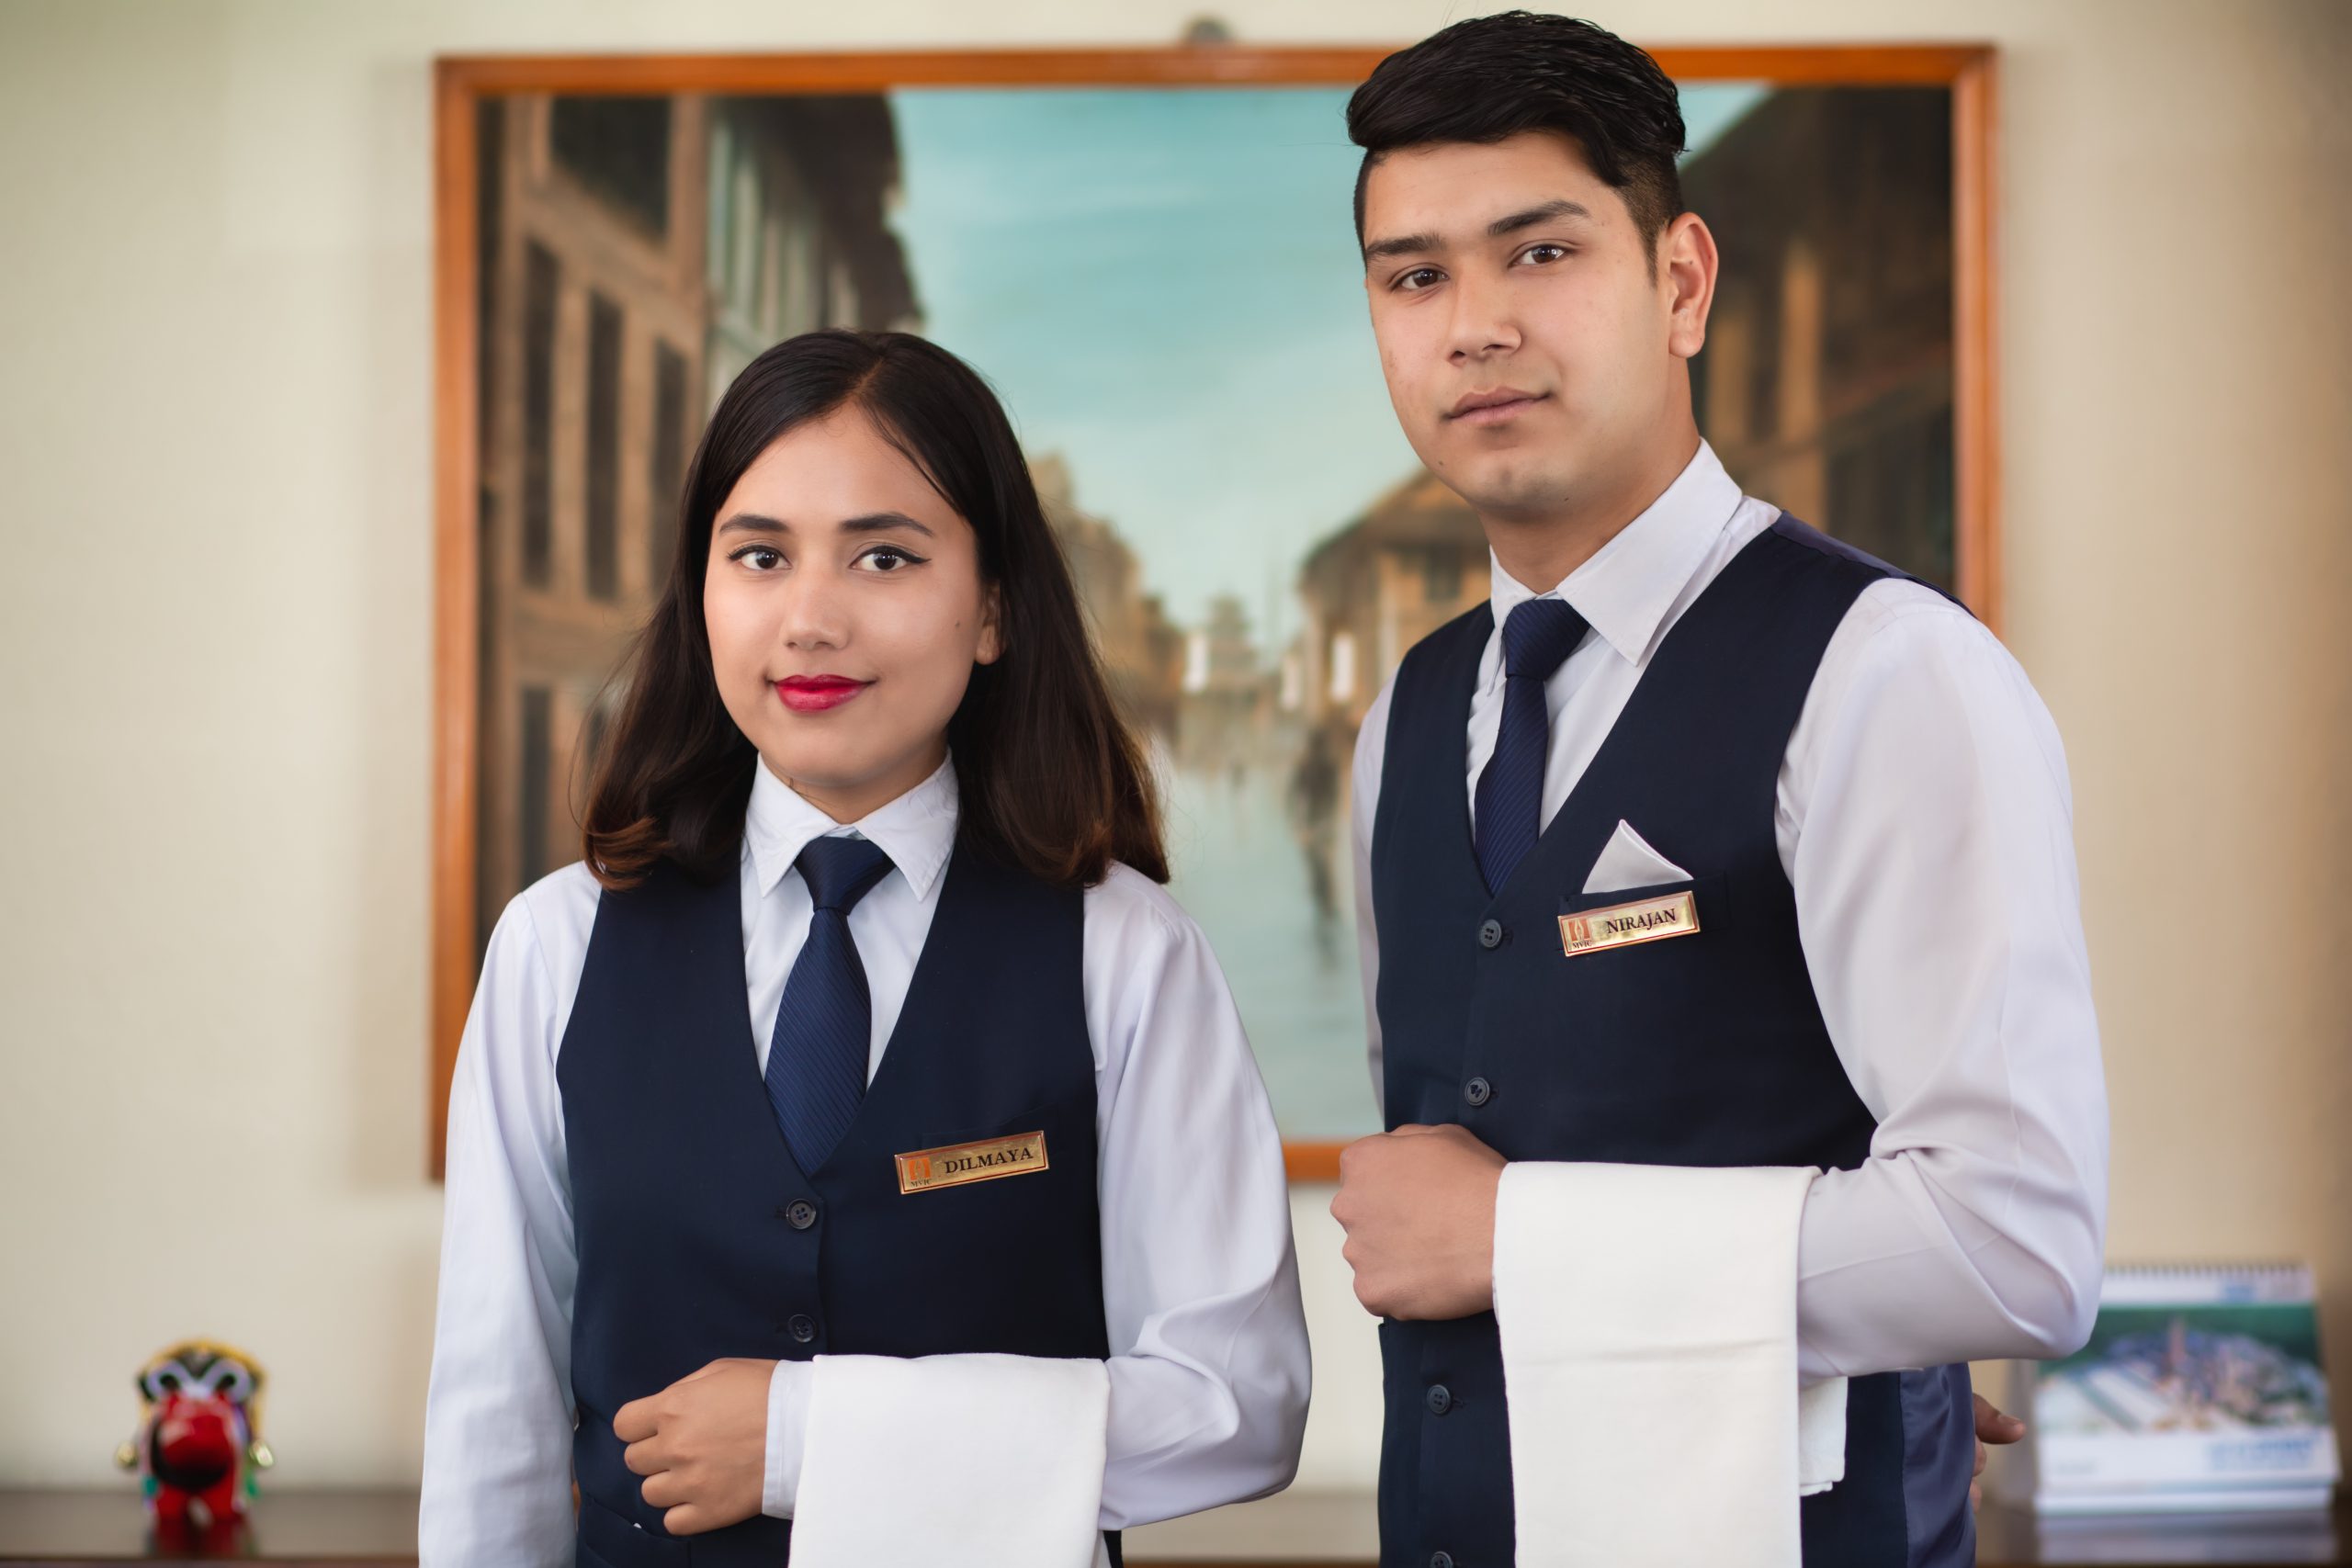 PROFESSIONAL DIPLOMA IN HOTEL MANAGEMENT